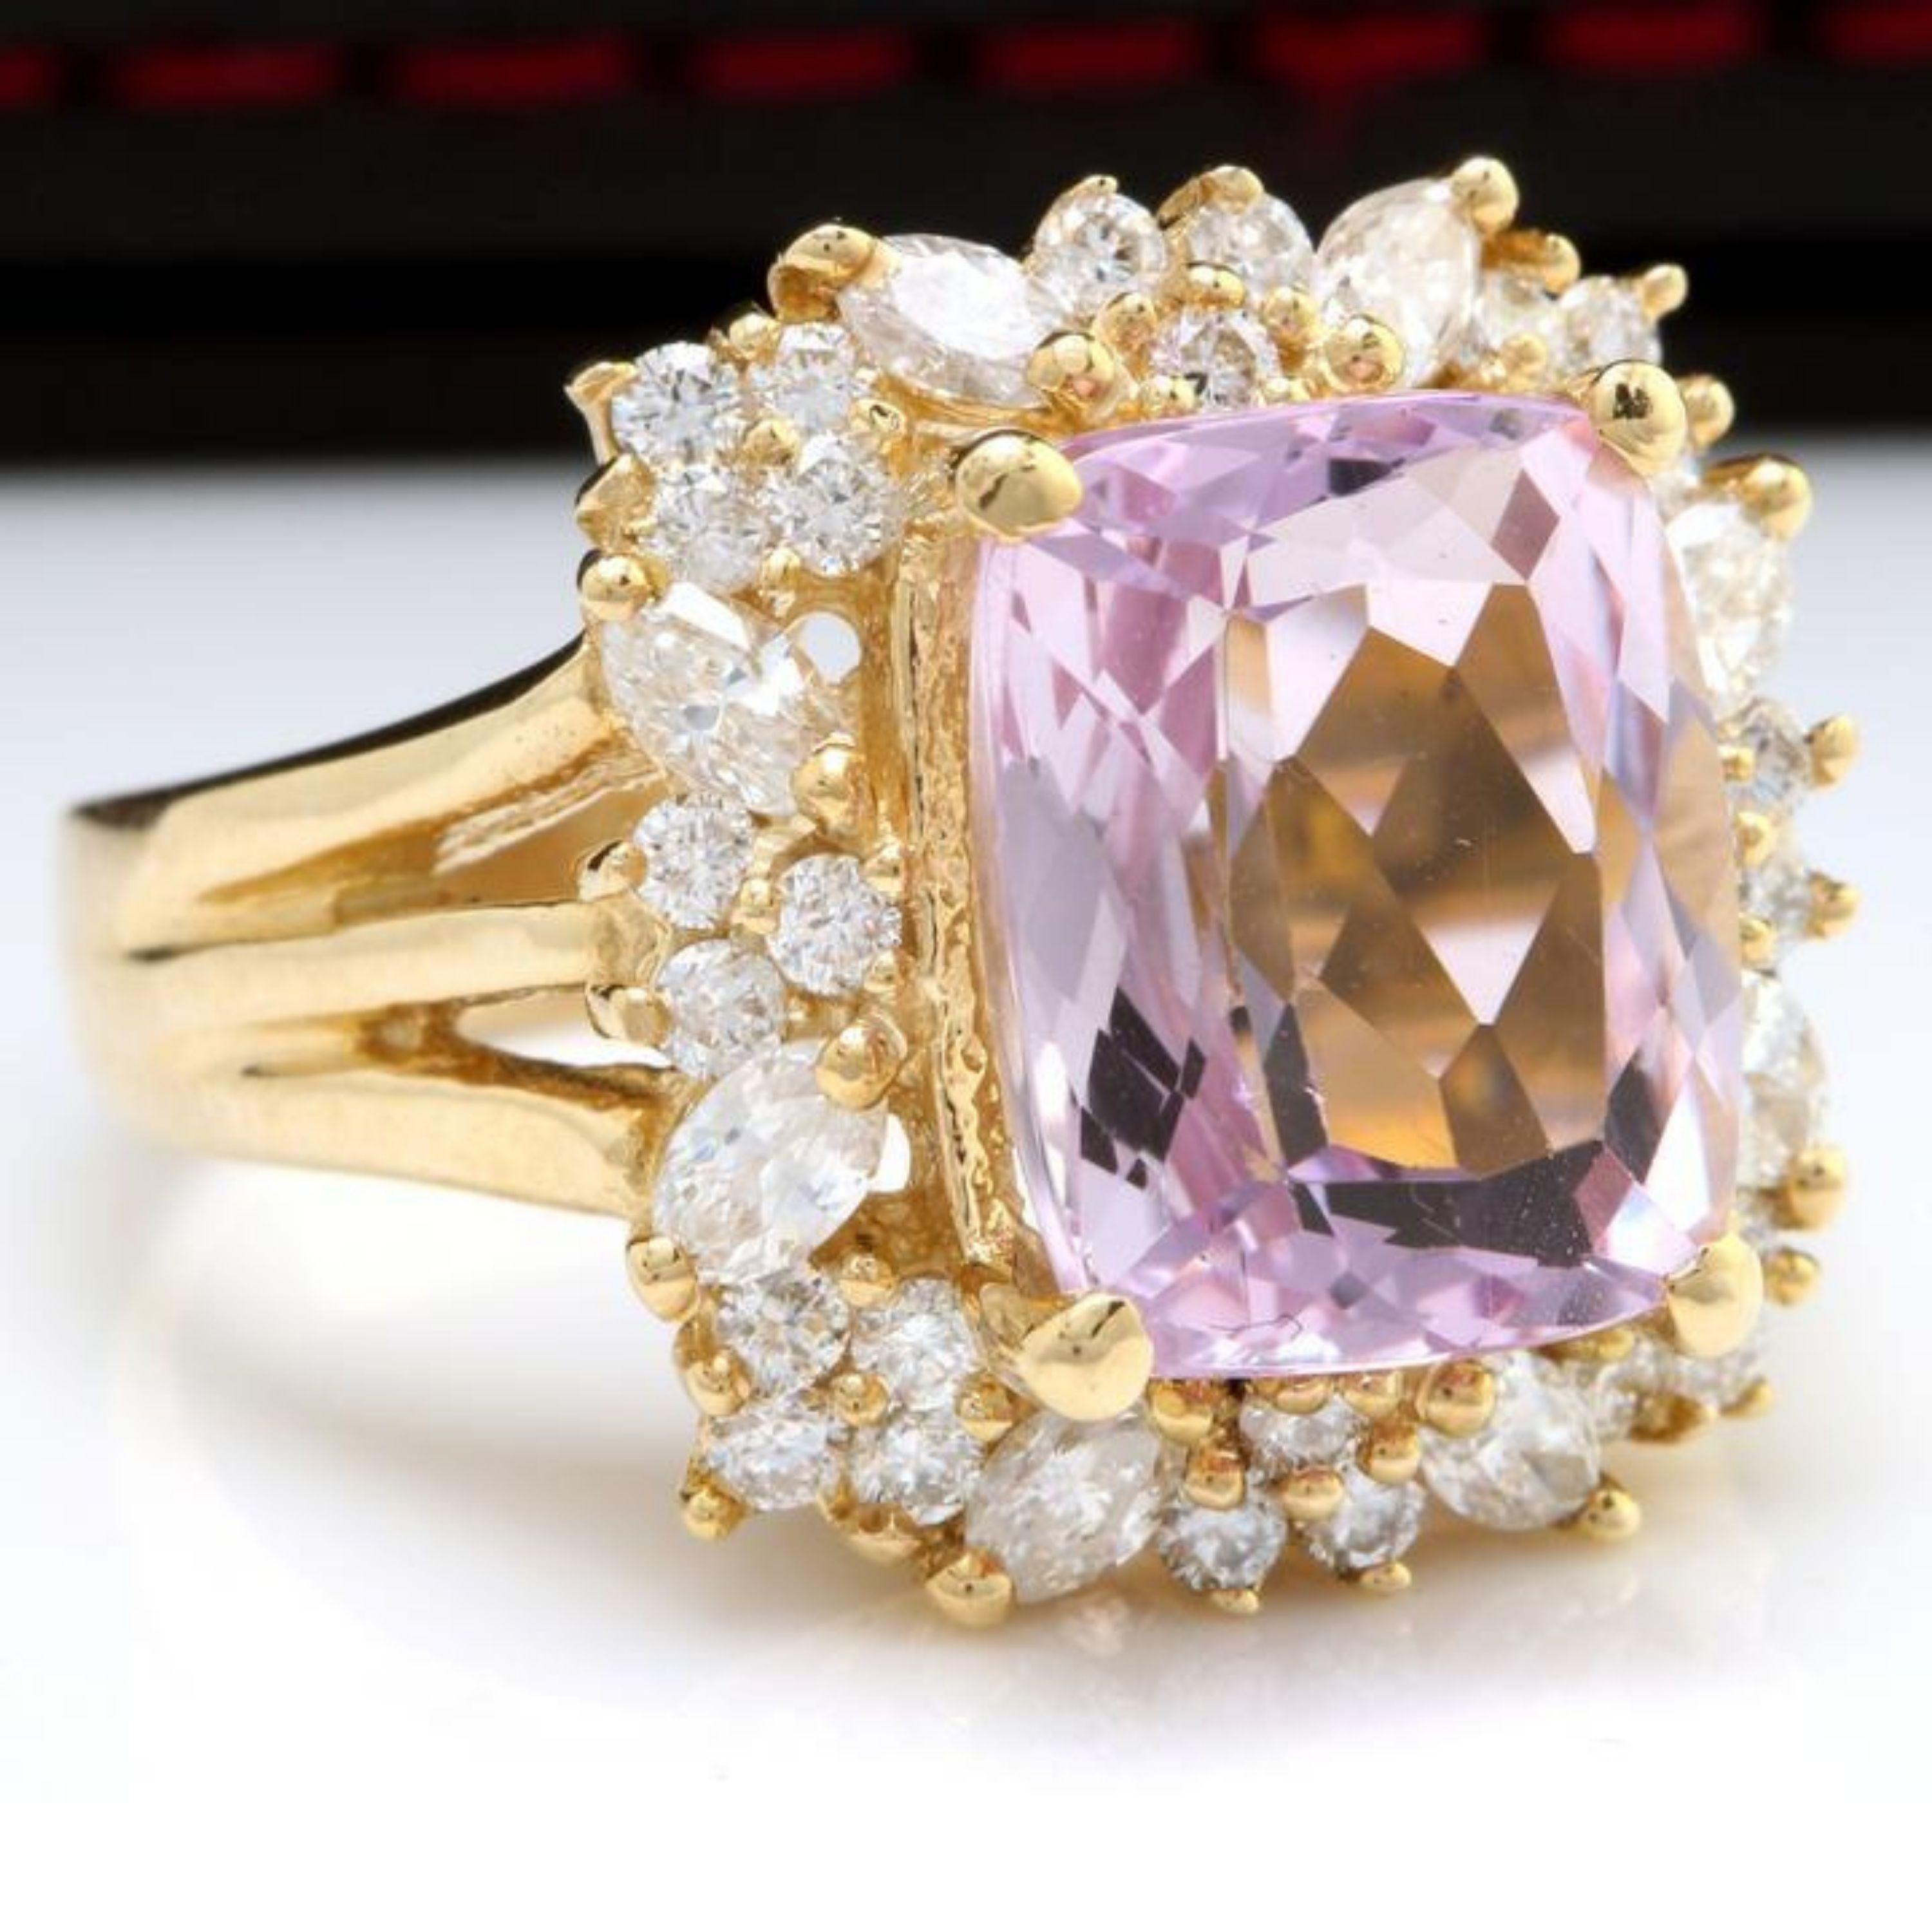 8.49 Carats Natural Kunzite and Diamond 14K Solid Yellow Gold Ring

Total Natural Cushion Cut Kunzite Weights: 6.71 Carats

Kunzite Measures: 12.00 X 10.00mm

Kunzite Treatment: Heating

Natural Round Diamonds Weight: 1.78 Carats (color G-H /